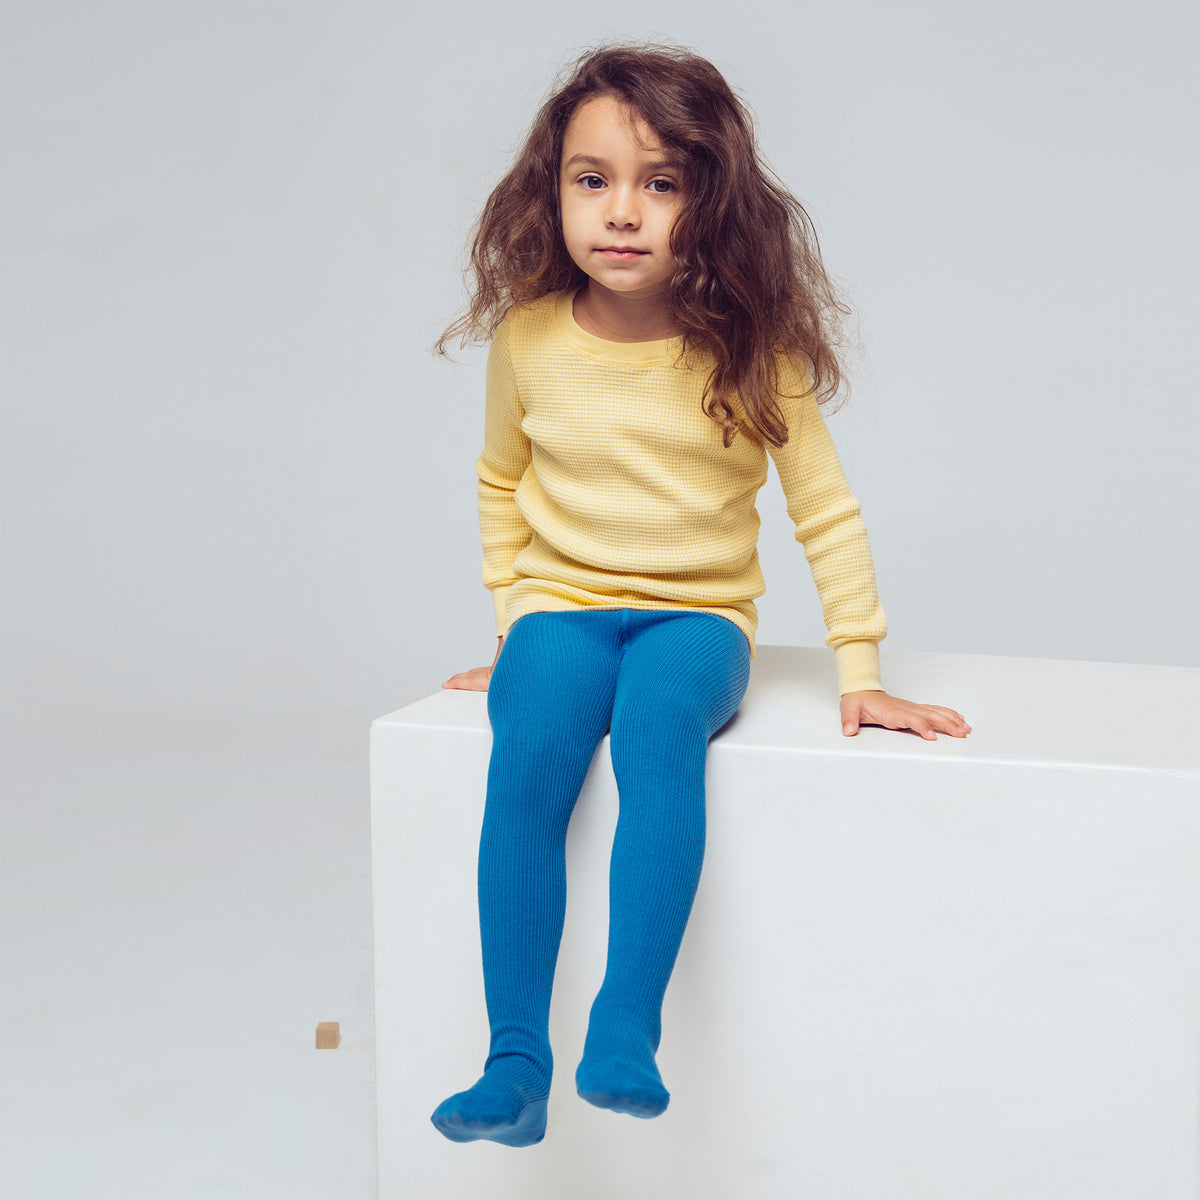 PEQNE Footed Children Tights in French Blue